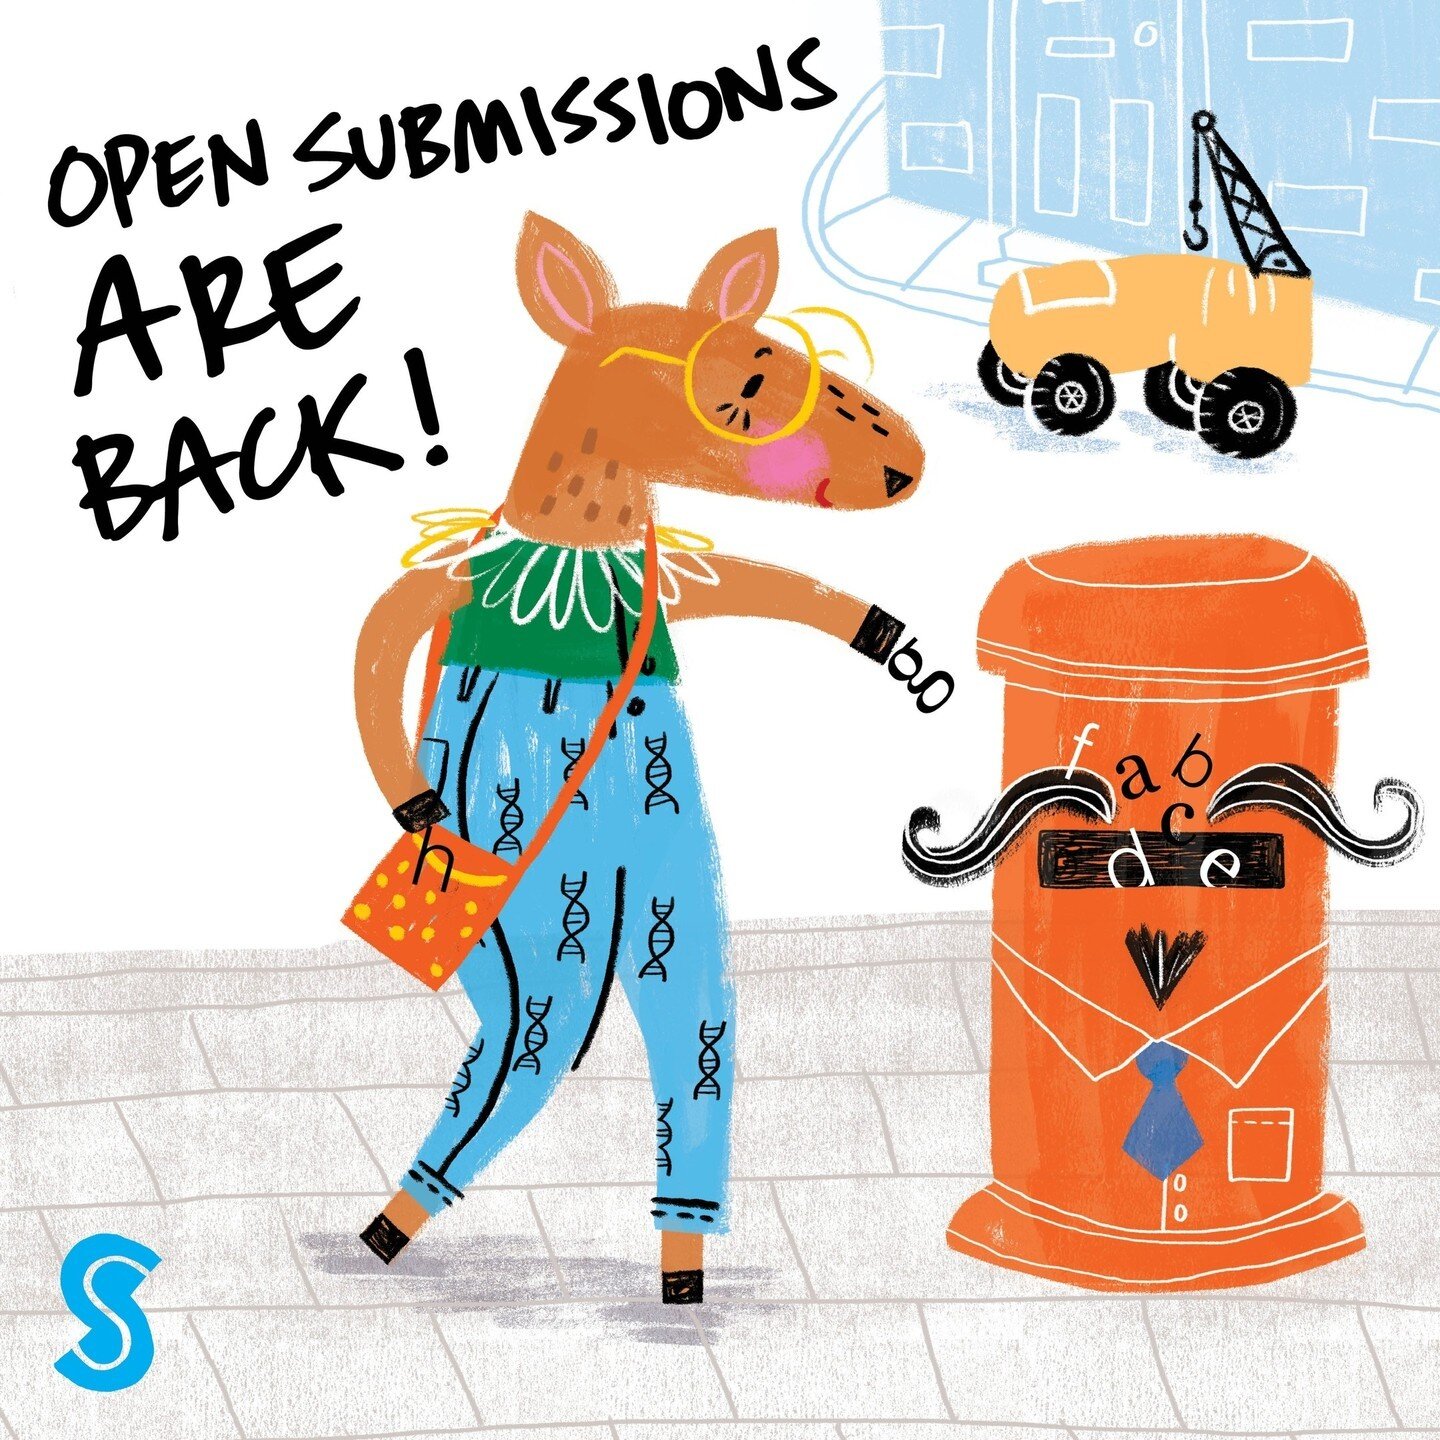 📘 Open submissions are back! 💙⁠
⁠
Going forward, Scribble will be open for submissions four times a year &mdash; once every three months.⁠
⁠
This year, our first submission window will be open for 24 hours on 1 April (no joke!). To send in your man